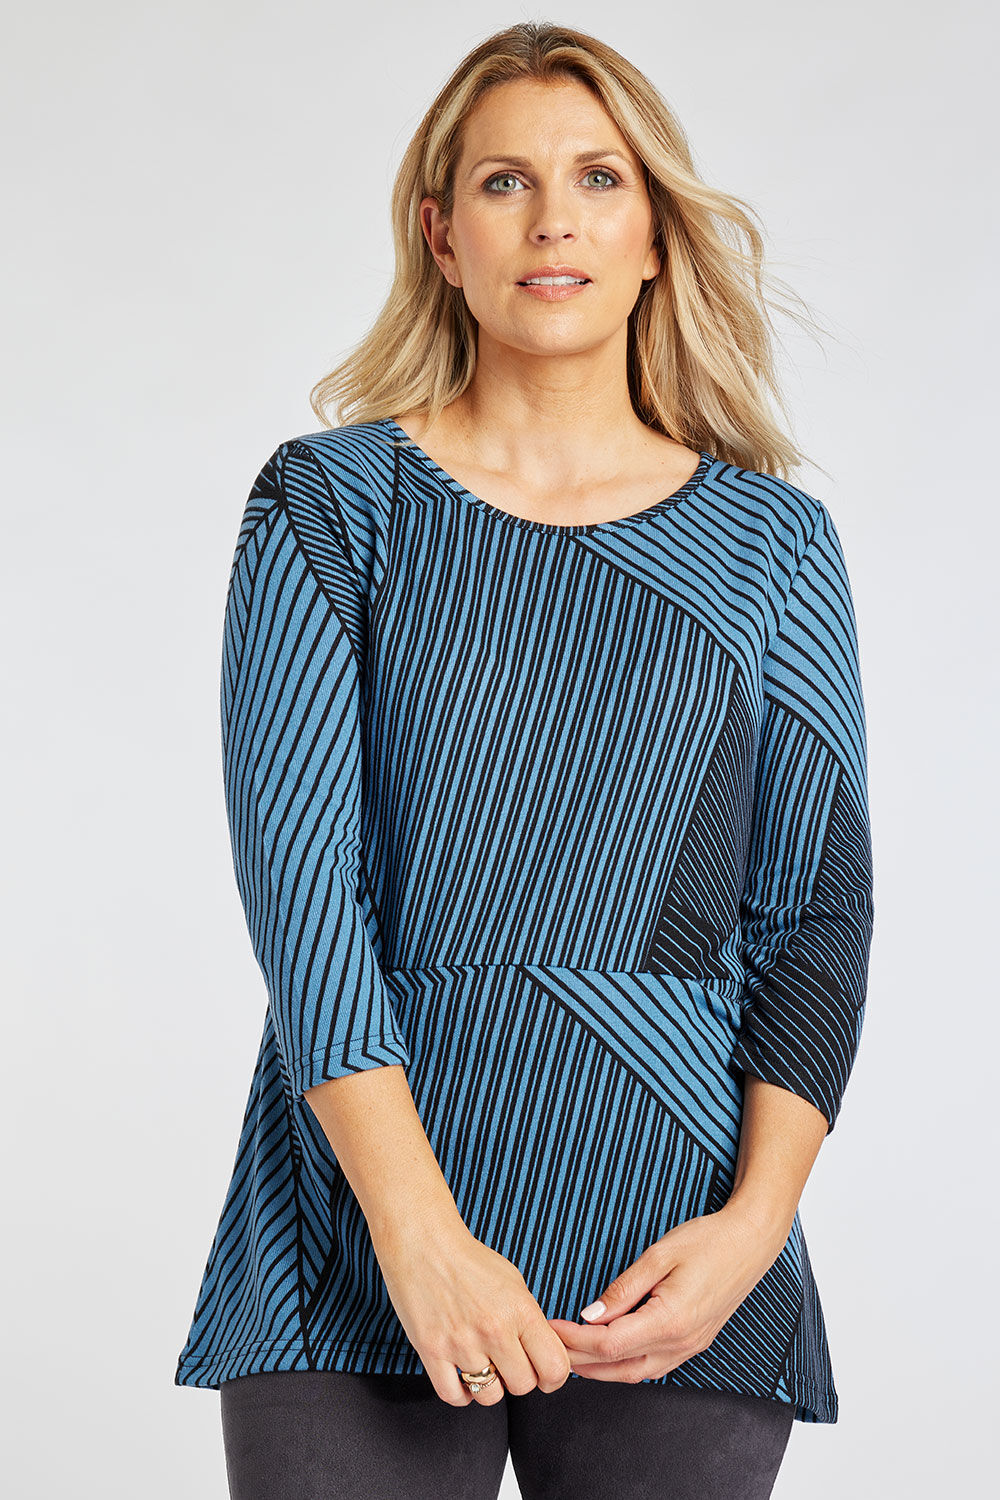 Bonmarche Navy 3/4 Sleeve Soft Touch Tunic With Striped Pocket Detail, Size: 12